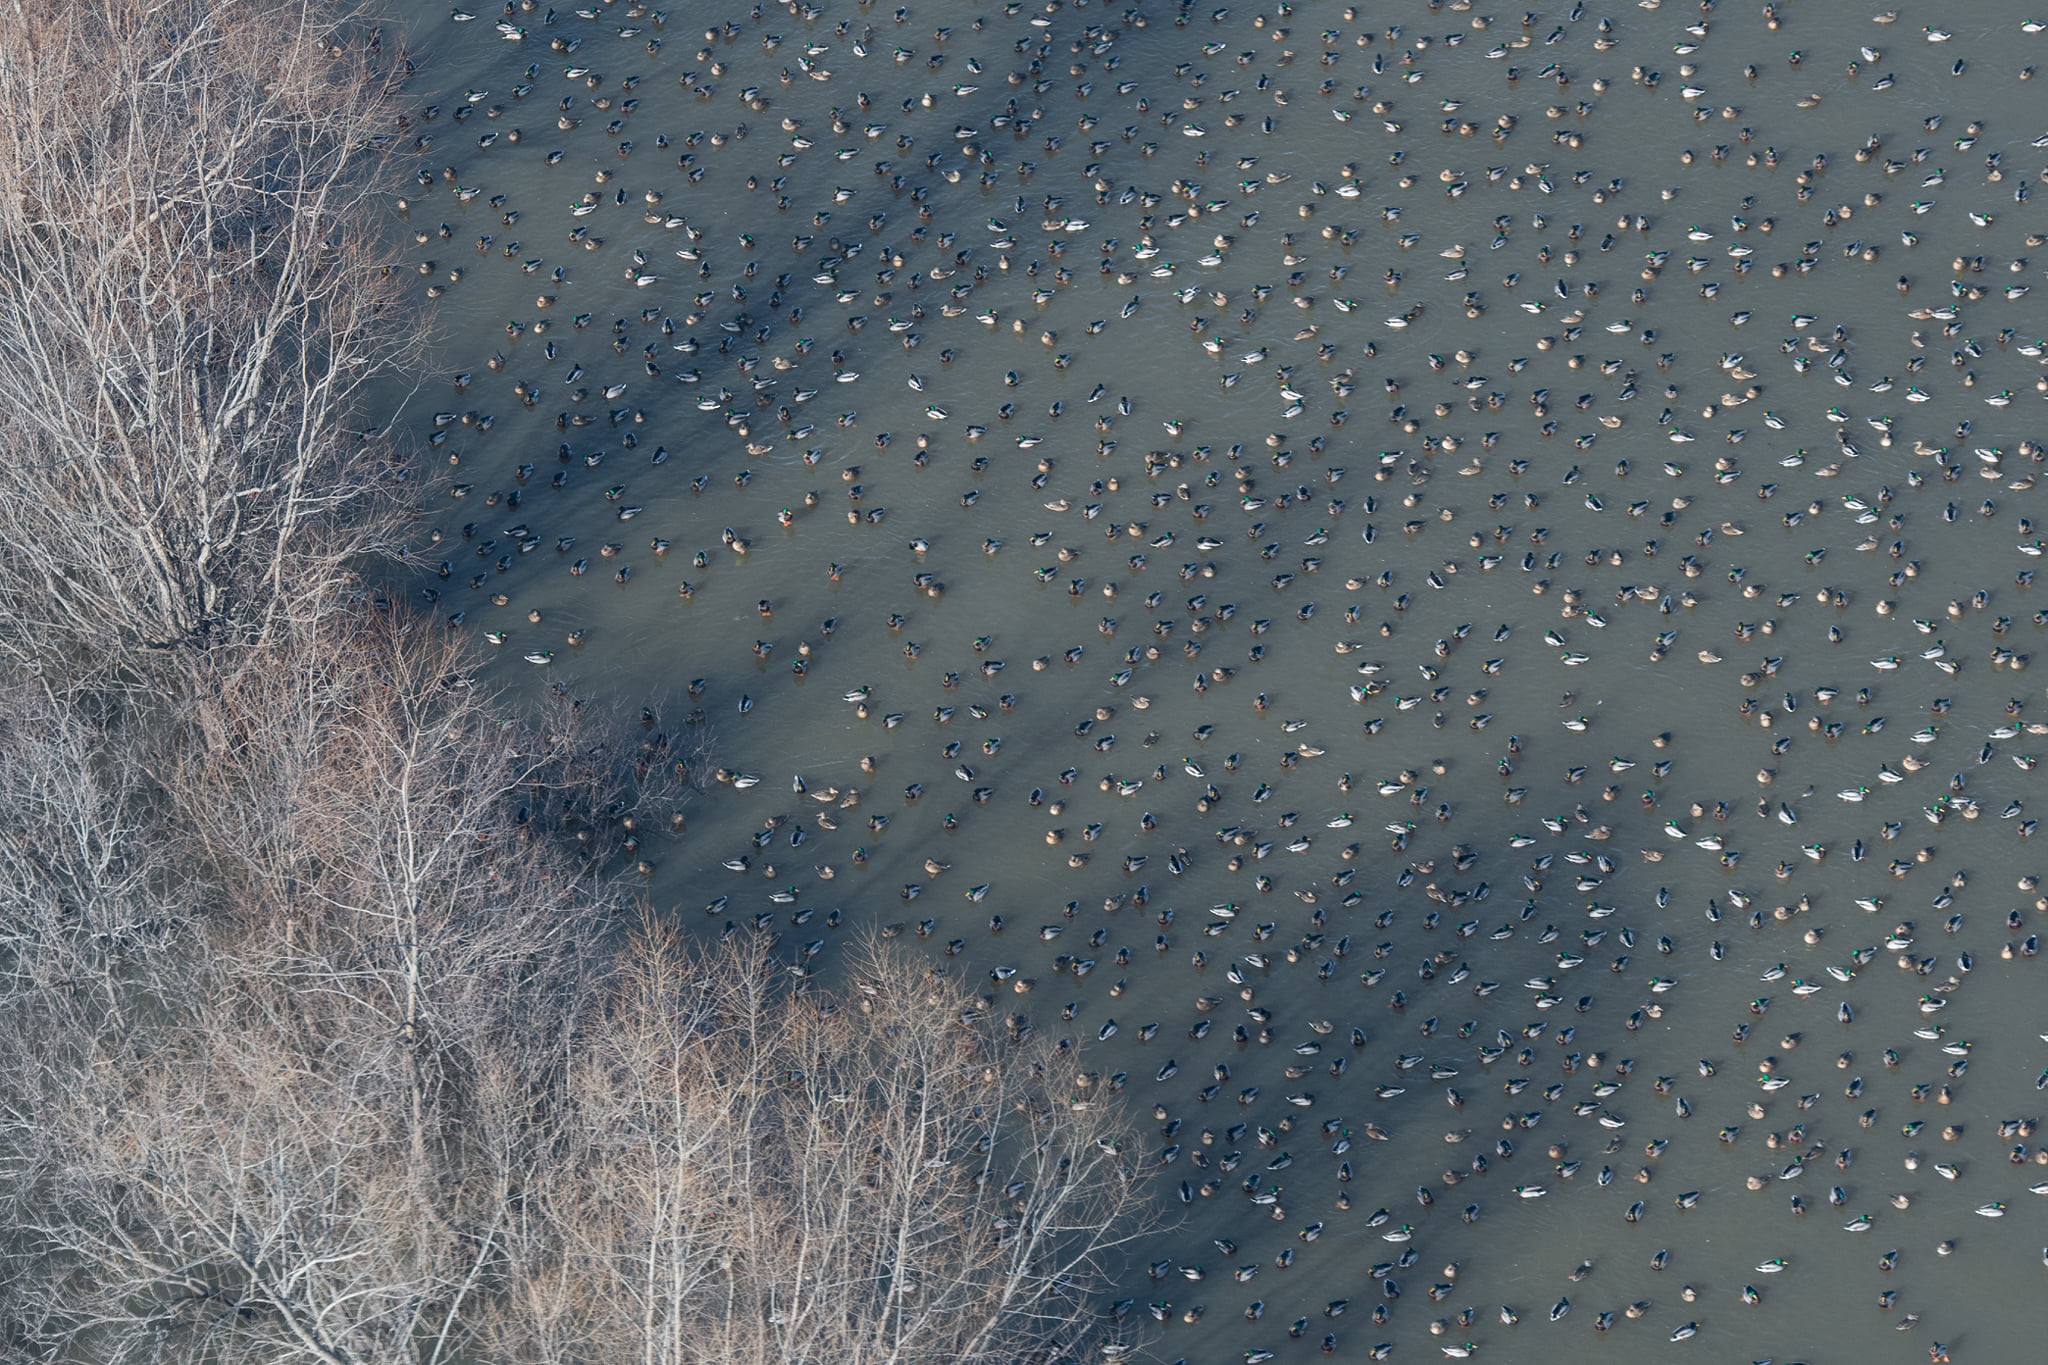 aerial image of a flock of mostly mallard next to a line of bare winter trees